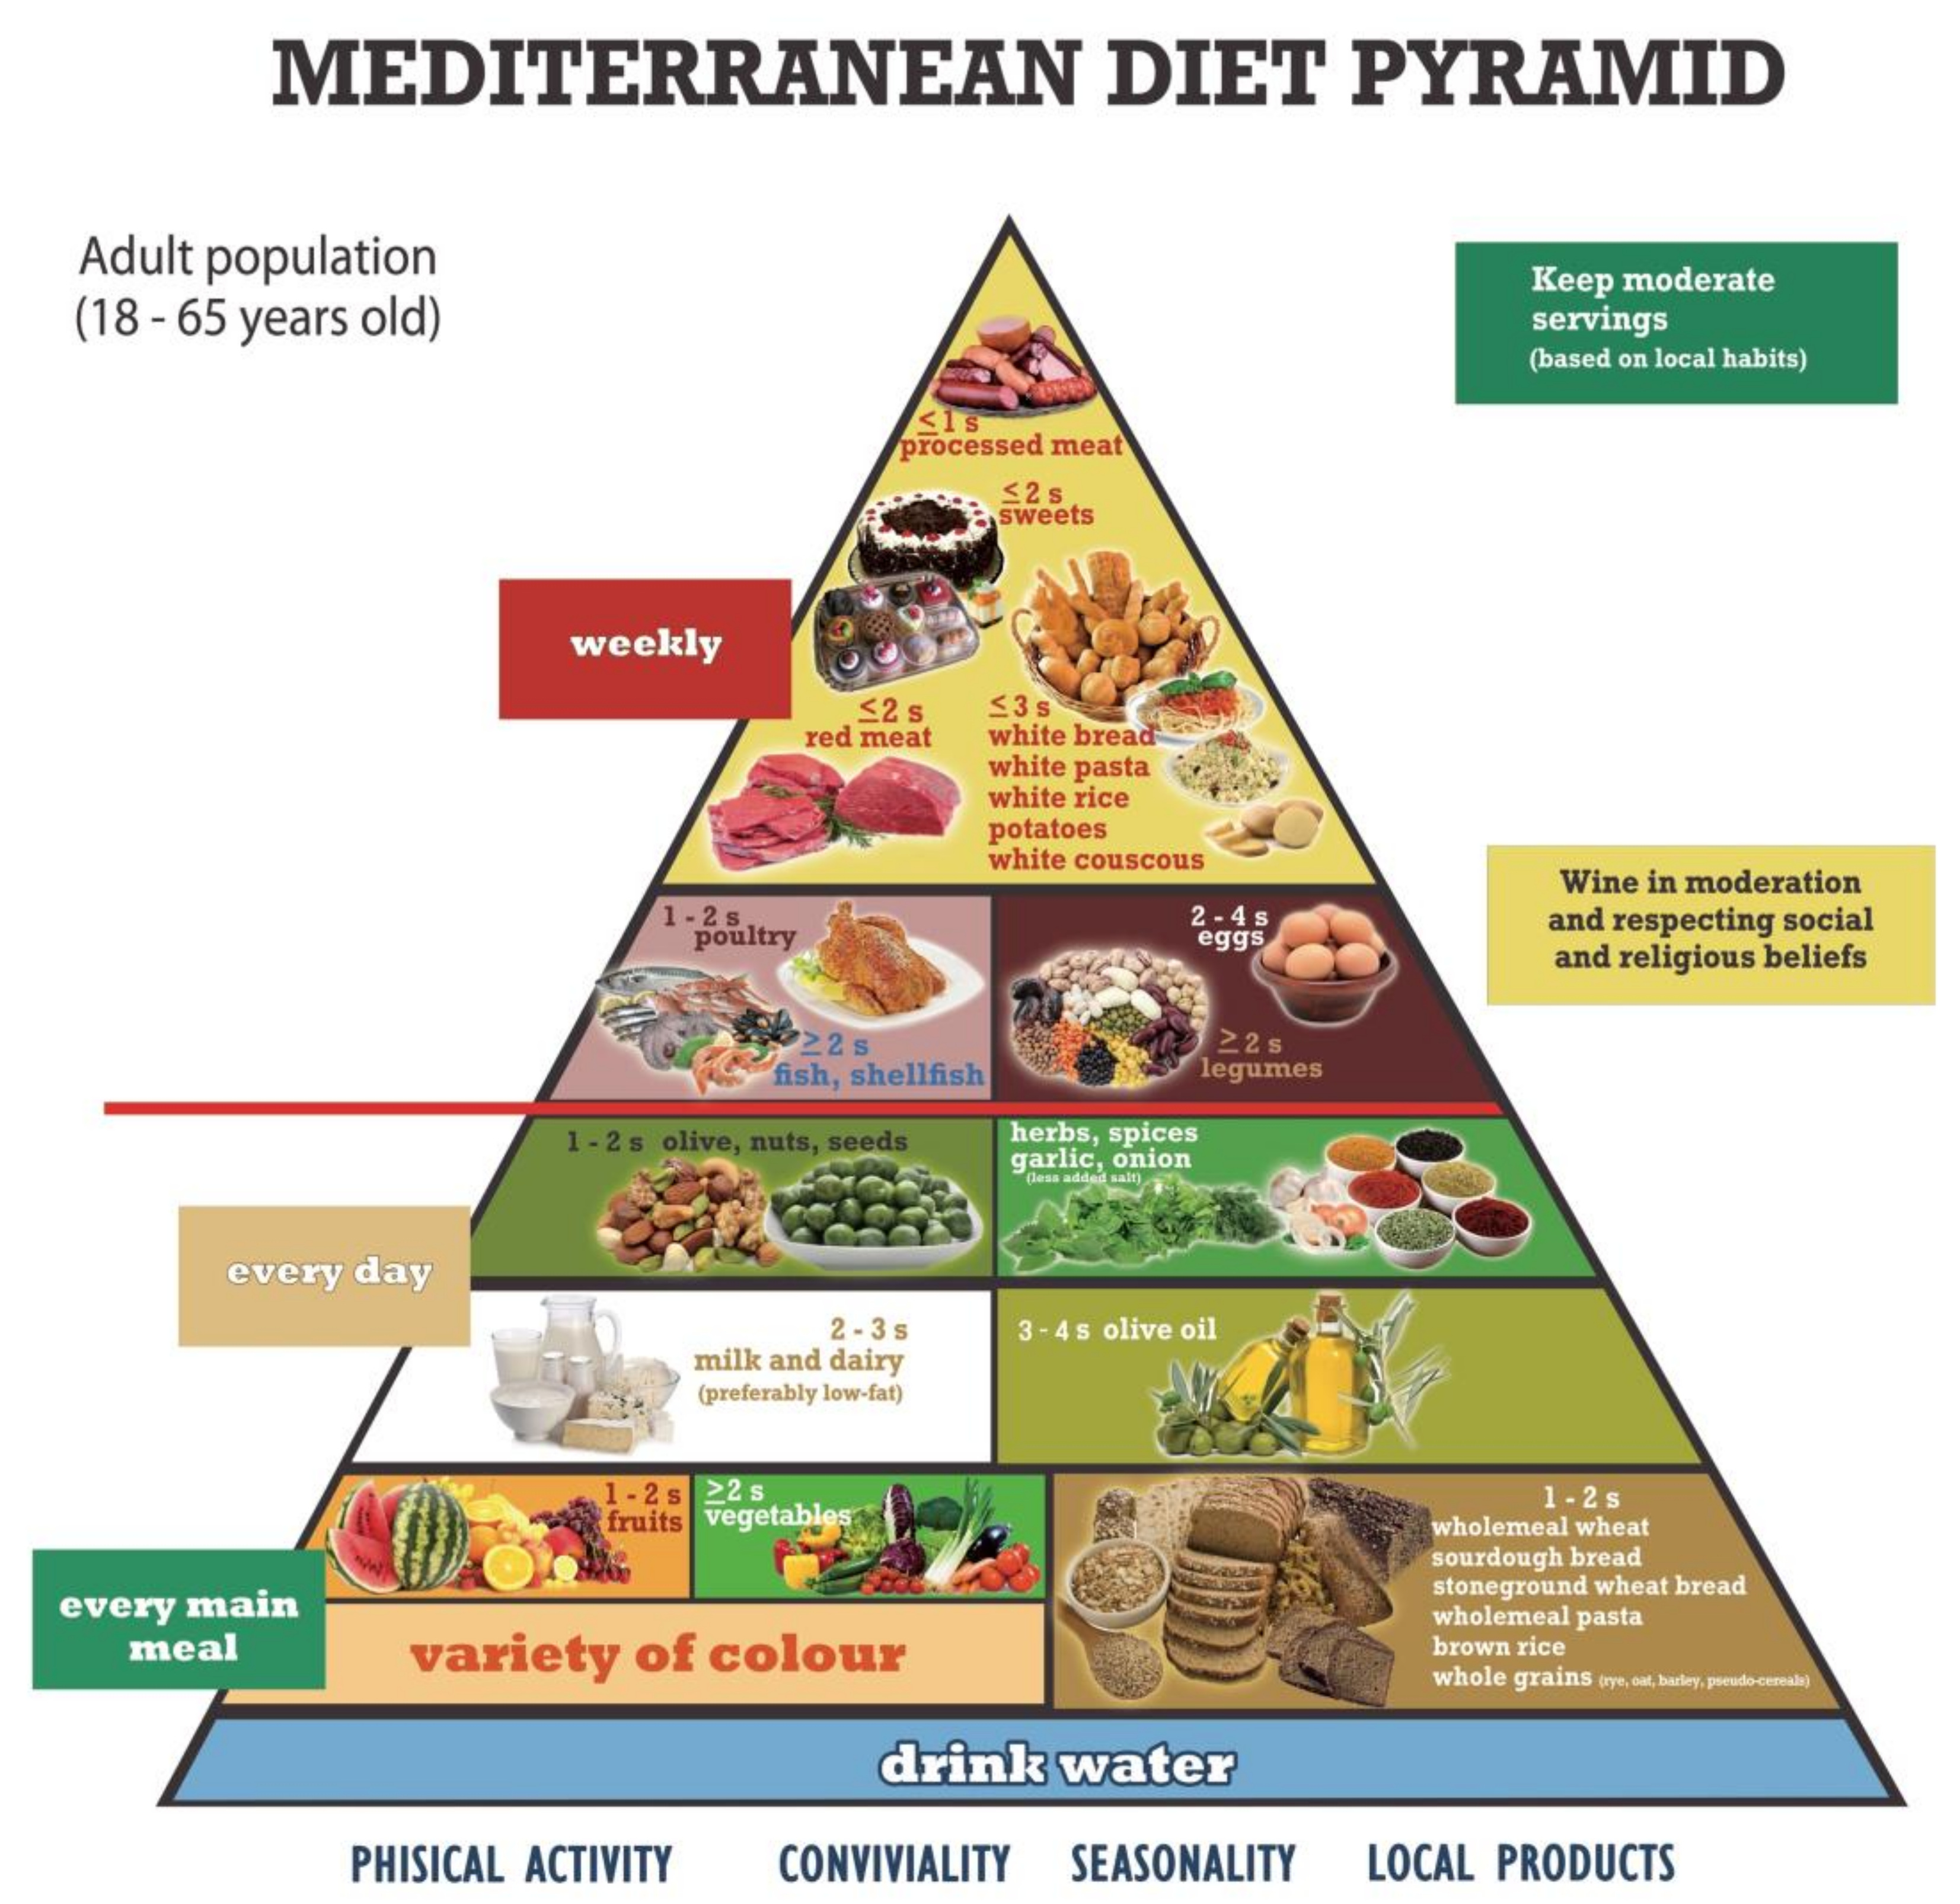 THE MEDITERRANEAN DIET: Mediterranean diet for beginners, mediterranean diet  plan, meal plan recipes, cookbook diet, mediterranean diet weight loss,  burn fat and reset your metabolism - Kindle edition by smith, melissa Health, Fitness & Dieting